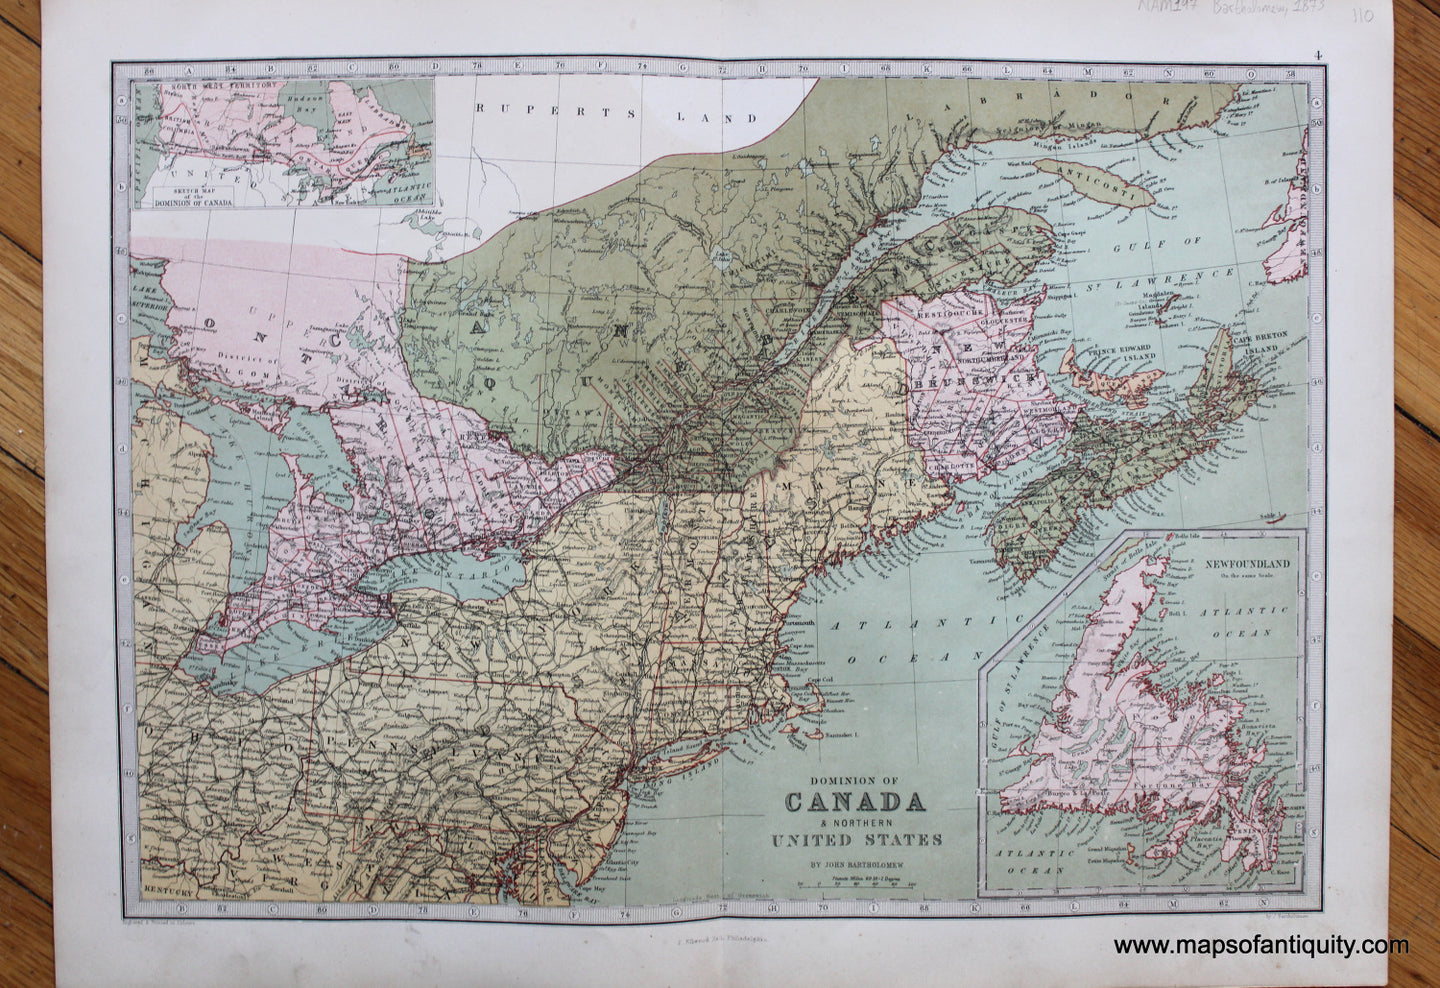 Antique-Printed-Color-Map-Dominion-of-Canada-&-Northern-United-States-North-America-North-America-General-1873-J.-Bartholomew-Maps-Of-Antiquity